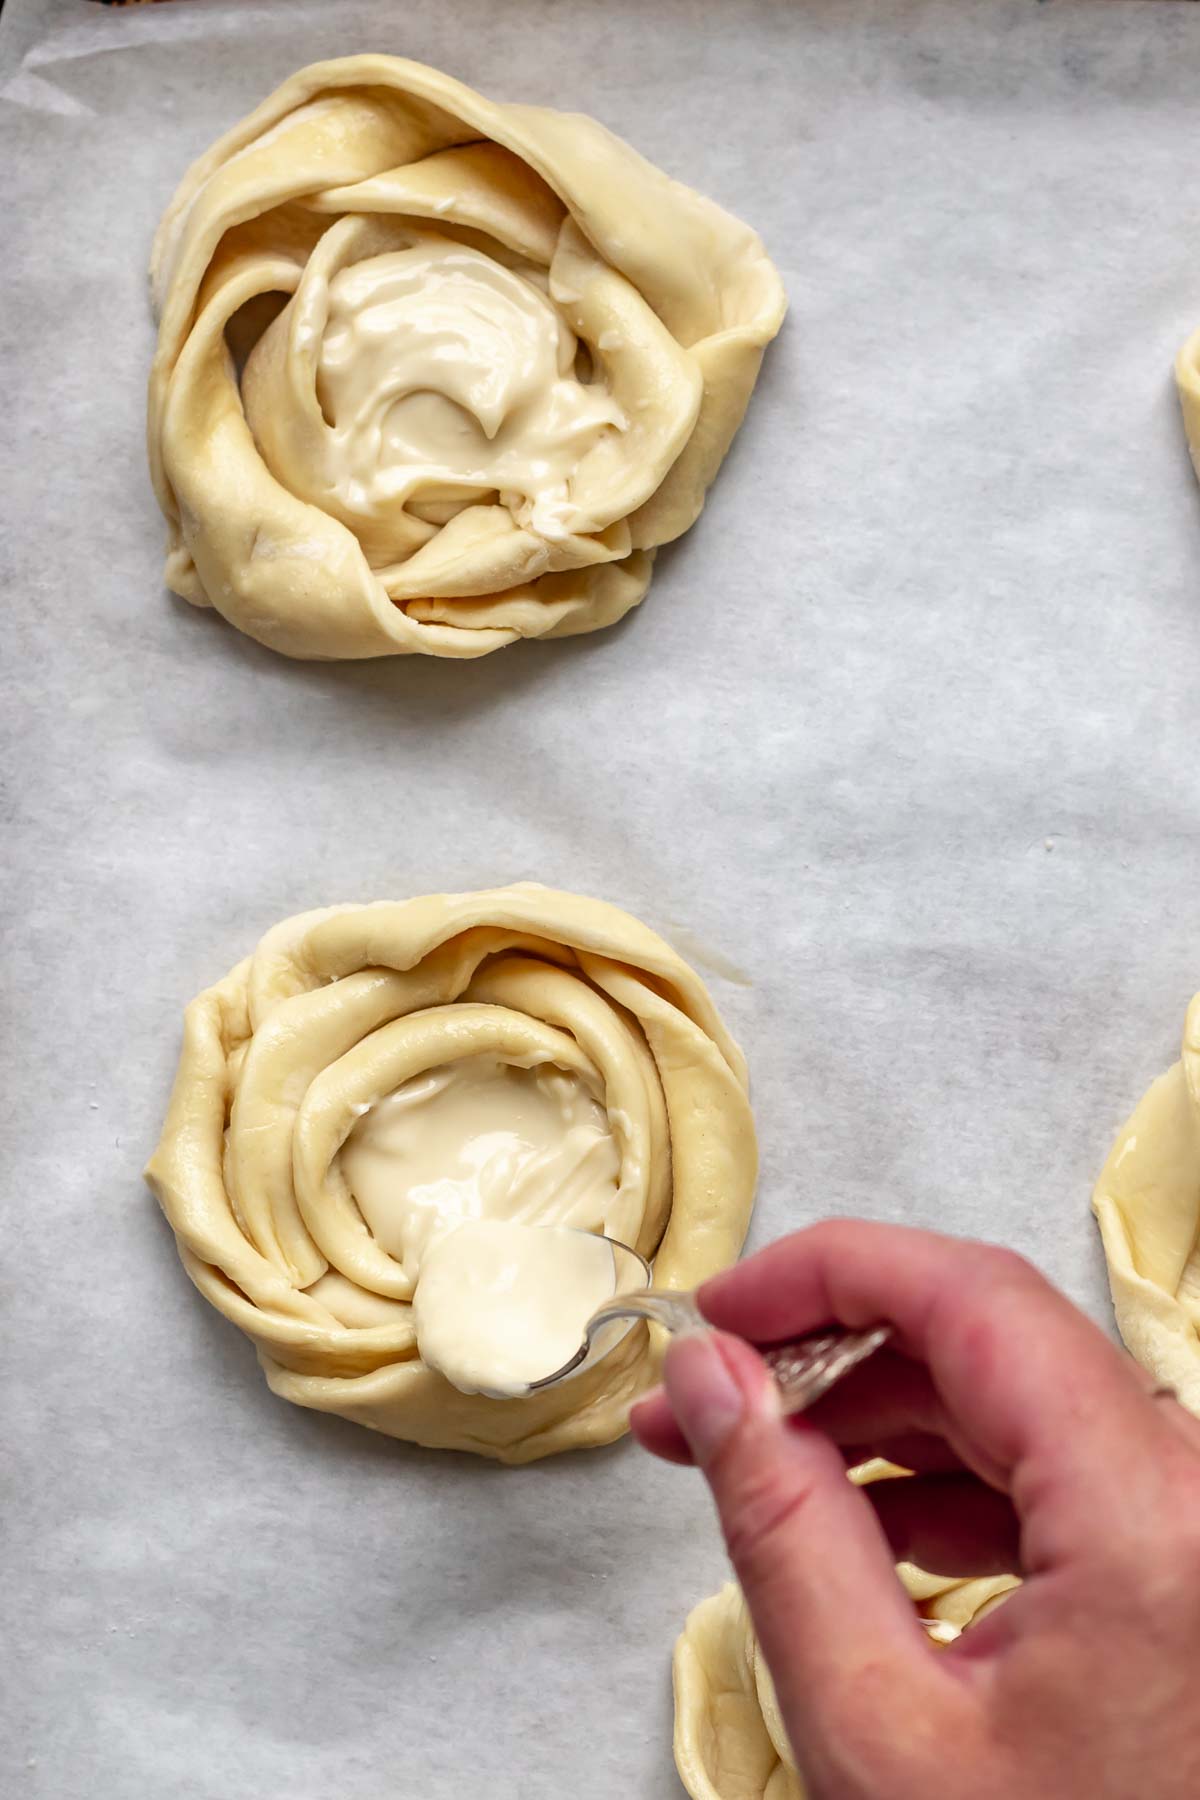 A hand adds cream cheese mixture to the center of the puff pastry roses.